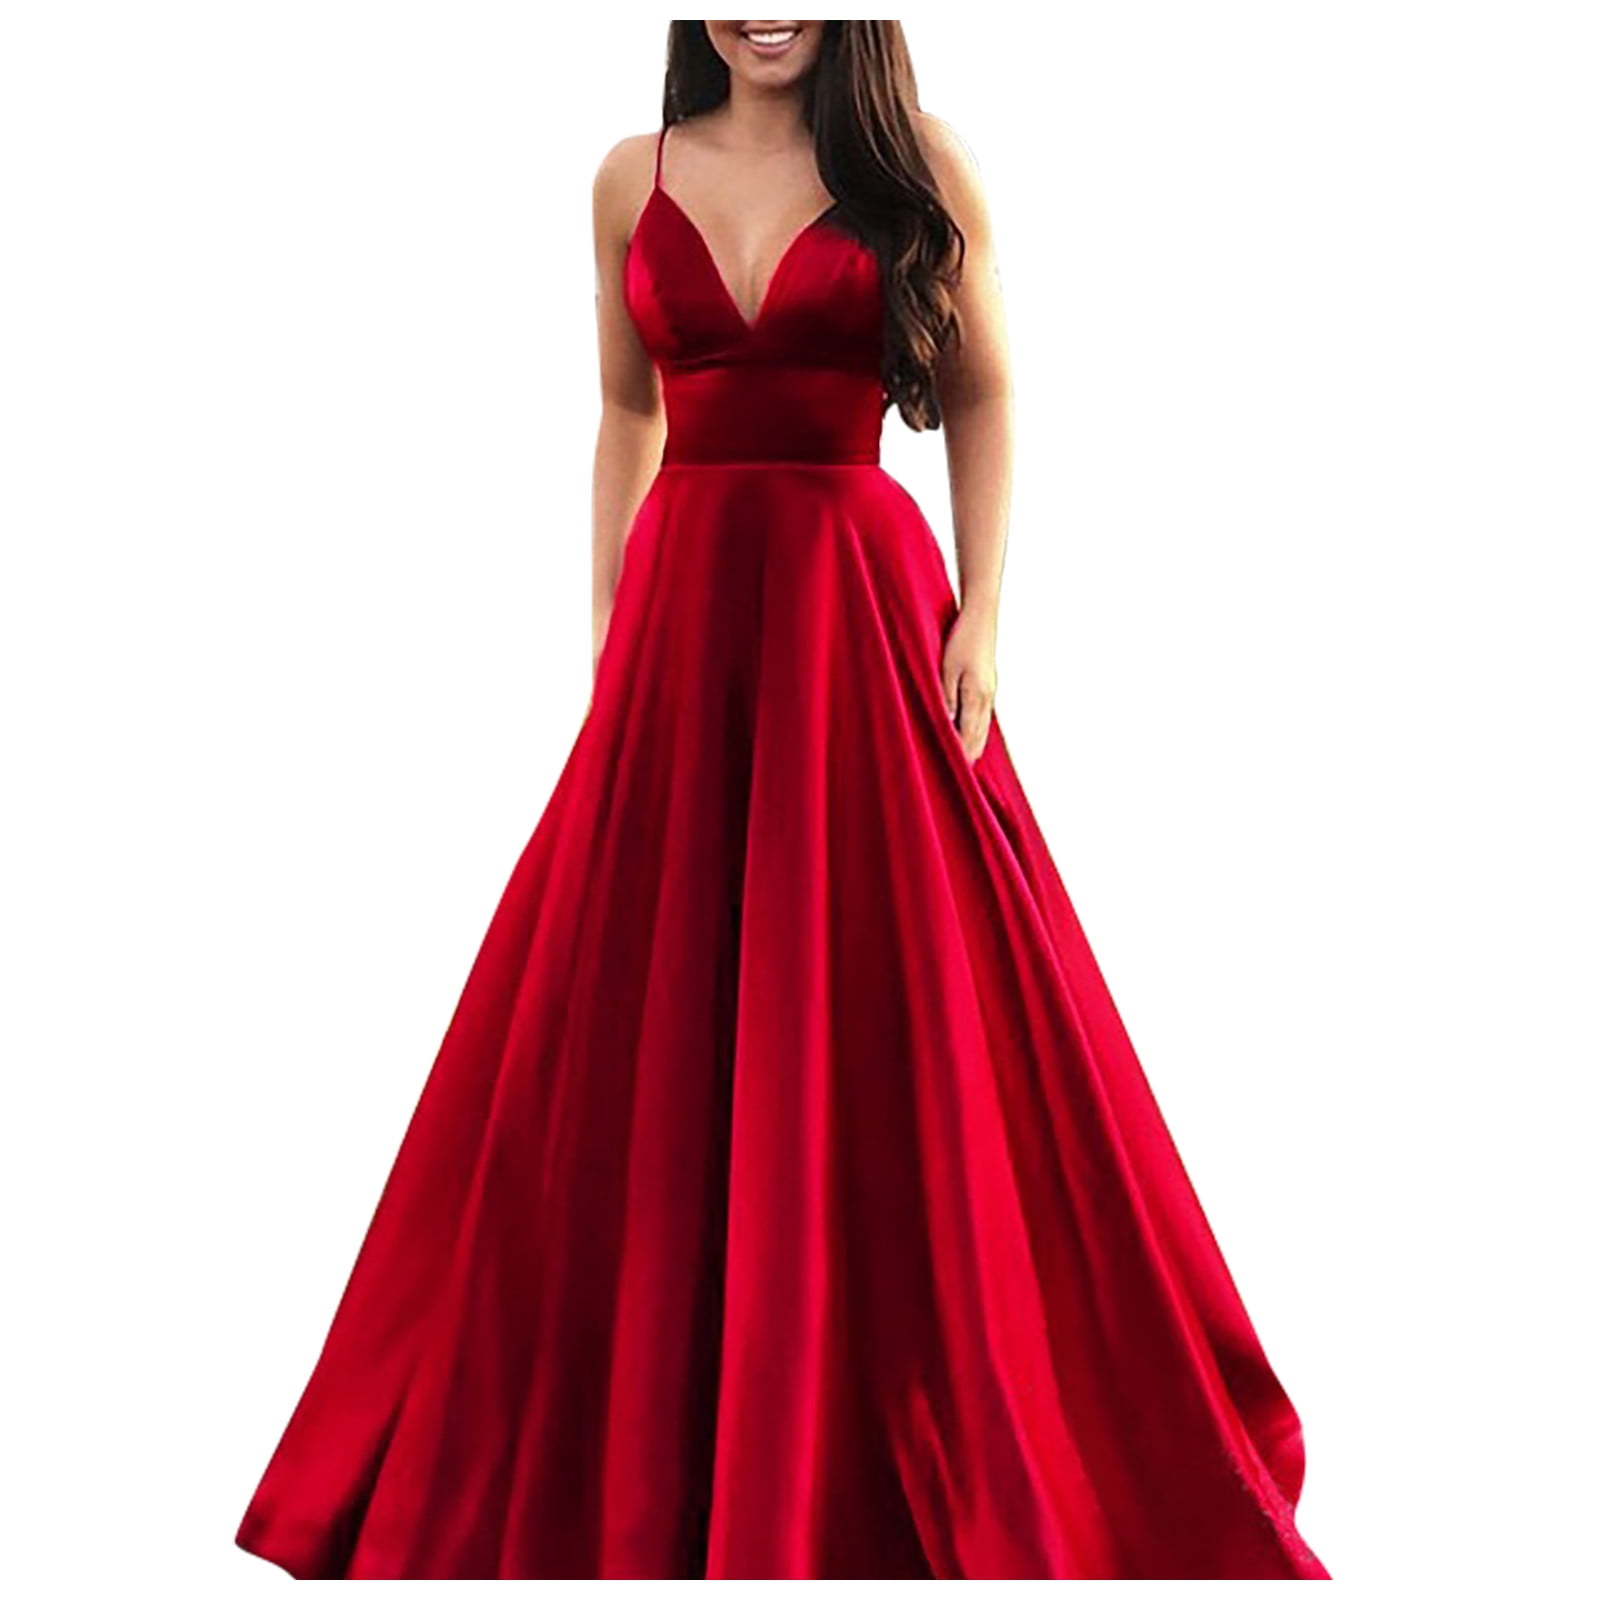 Elegant Plus Size Bright Orange Prom Dress With Puff Sleeves And Solid Cloth  Perfect For Evening Parties And Casual Wear In Summer 2023 Available In 4XL  And 5XL Sizes From Shacksla, $45.26 |